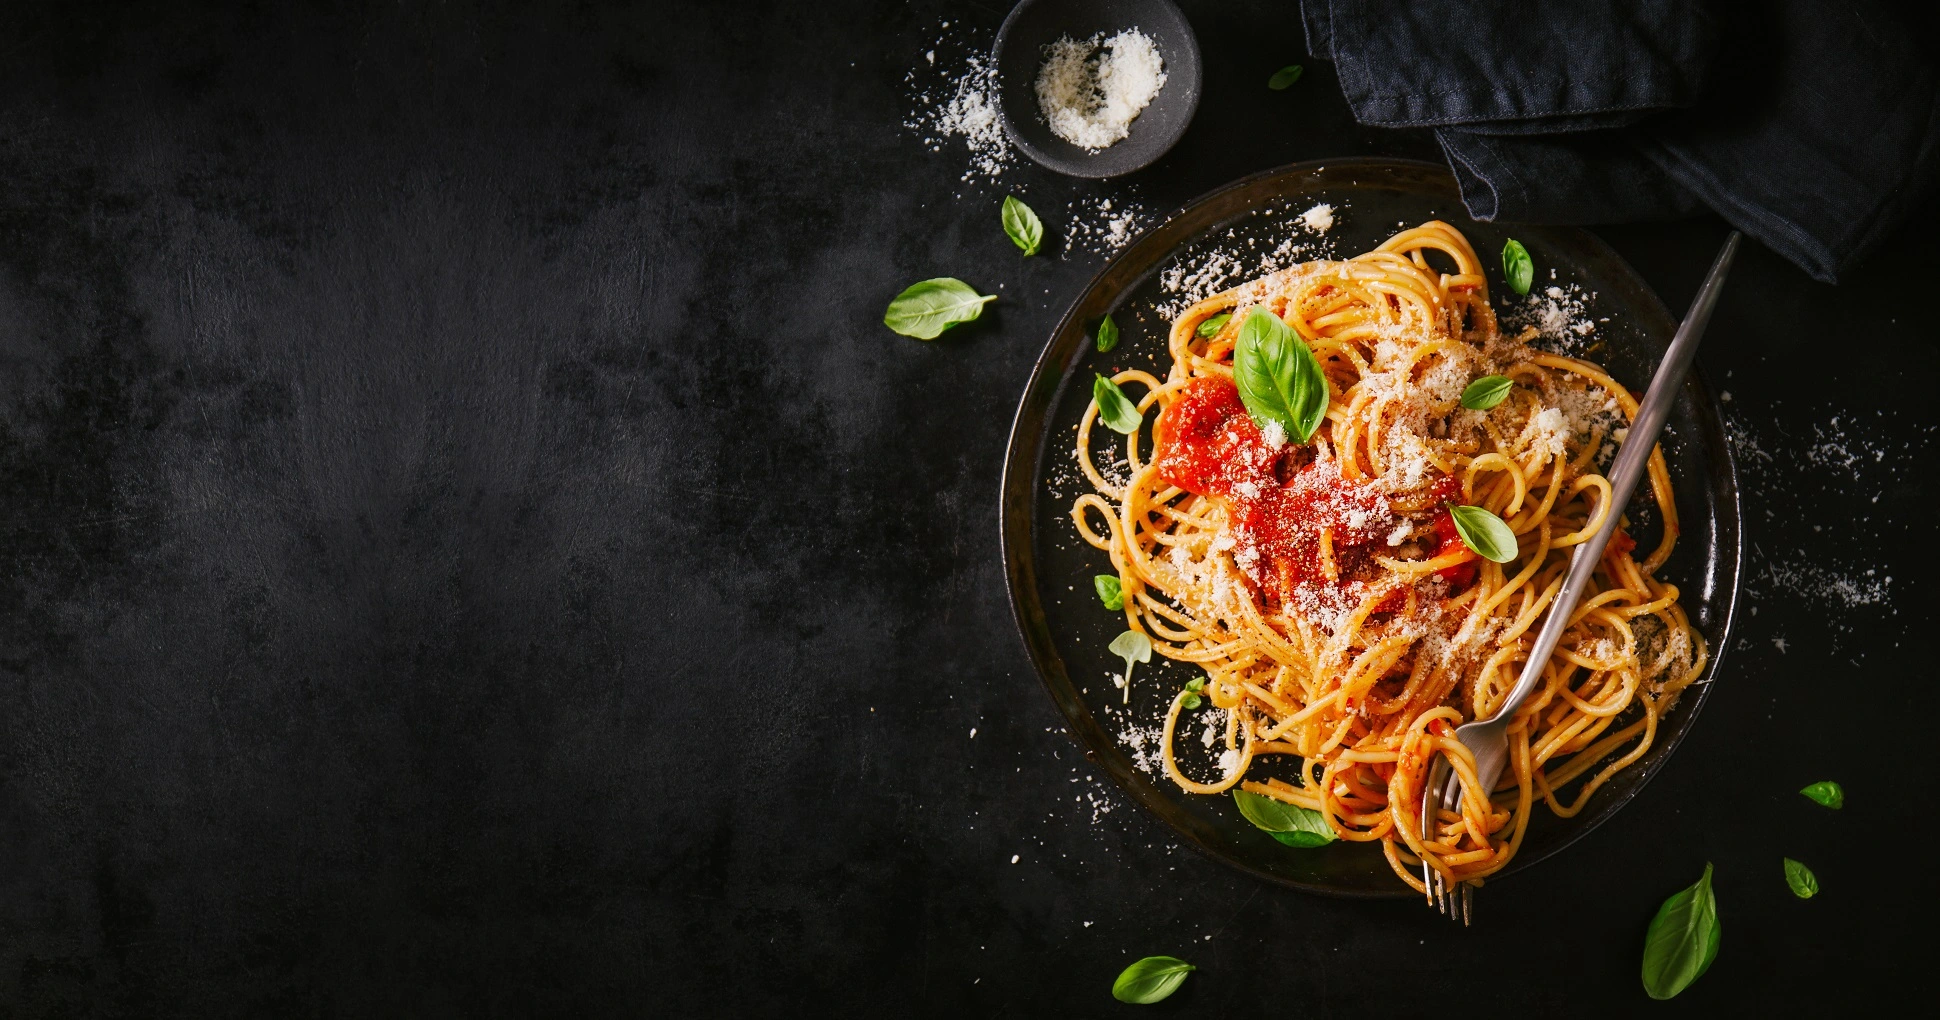 A plate of spaghetti topped with red tomato sauce, Parmesan cheese, fresh ground pepper,and fresh basil leaves.